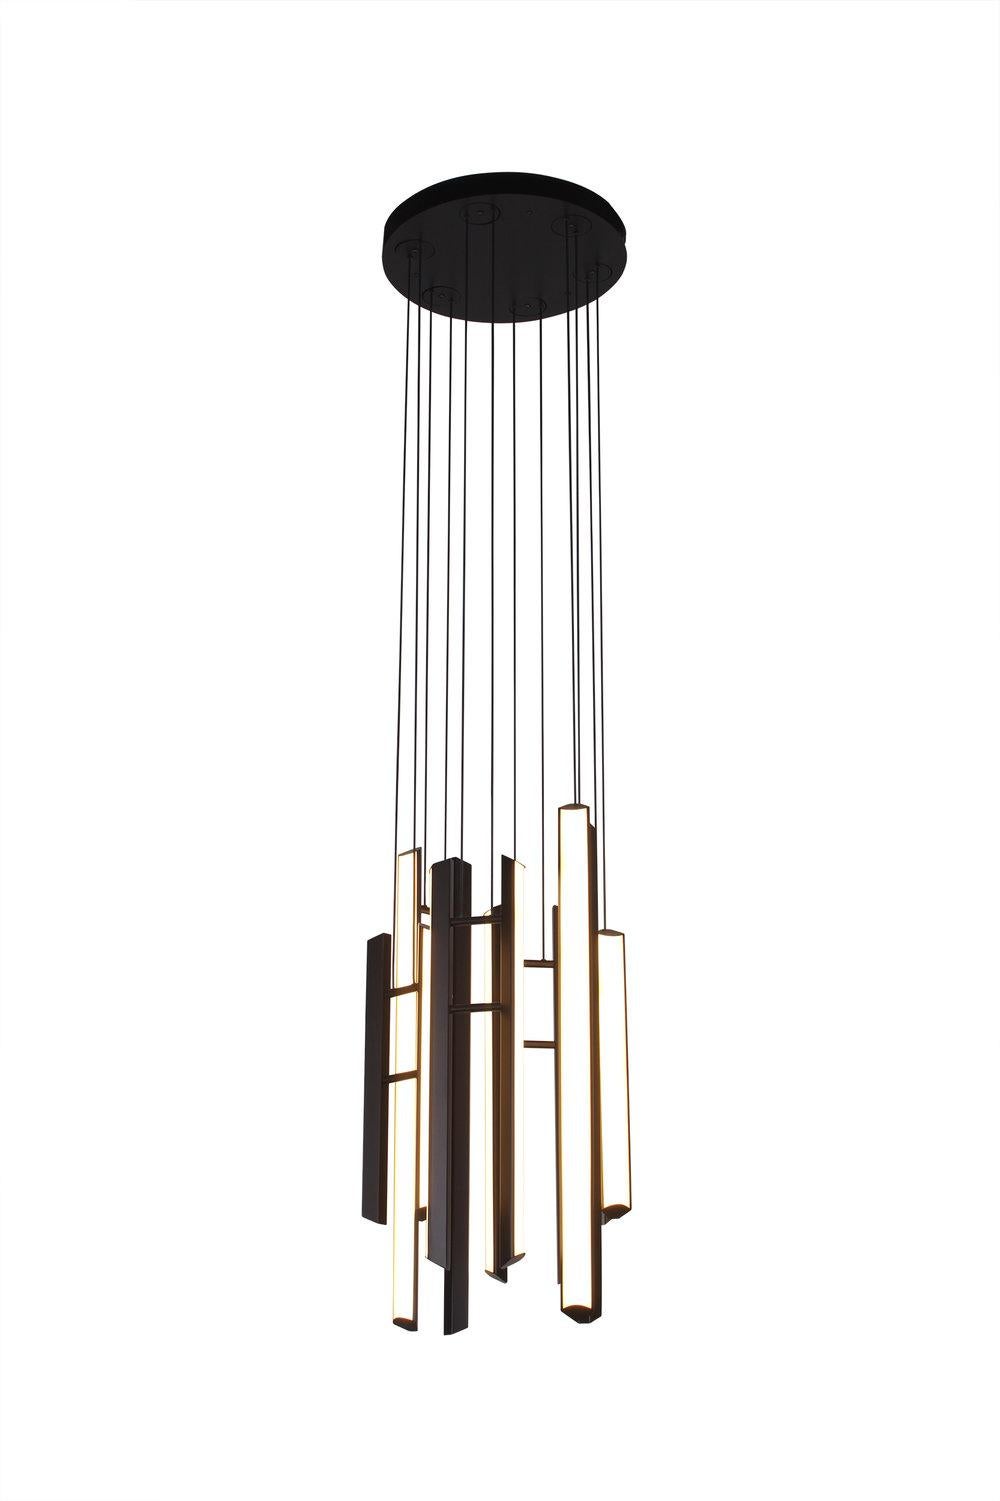 CHIME CHANDELIER suspends delicately balanced pairs of Chime bars which are inspired by the harmonious sound of resonating bells. Both compact and customizable, Chime chandelier is an enchanting addition to a staircase or grand entry.

See the full